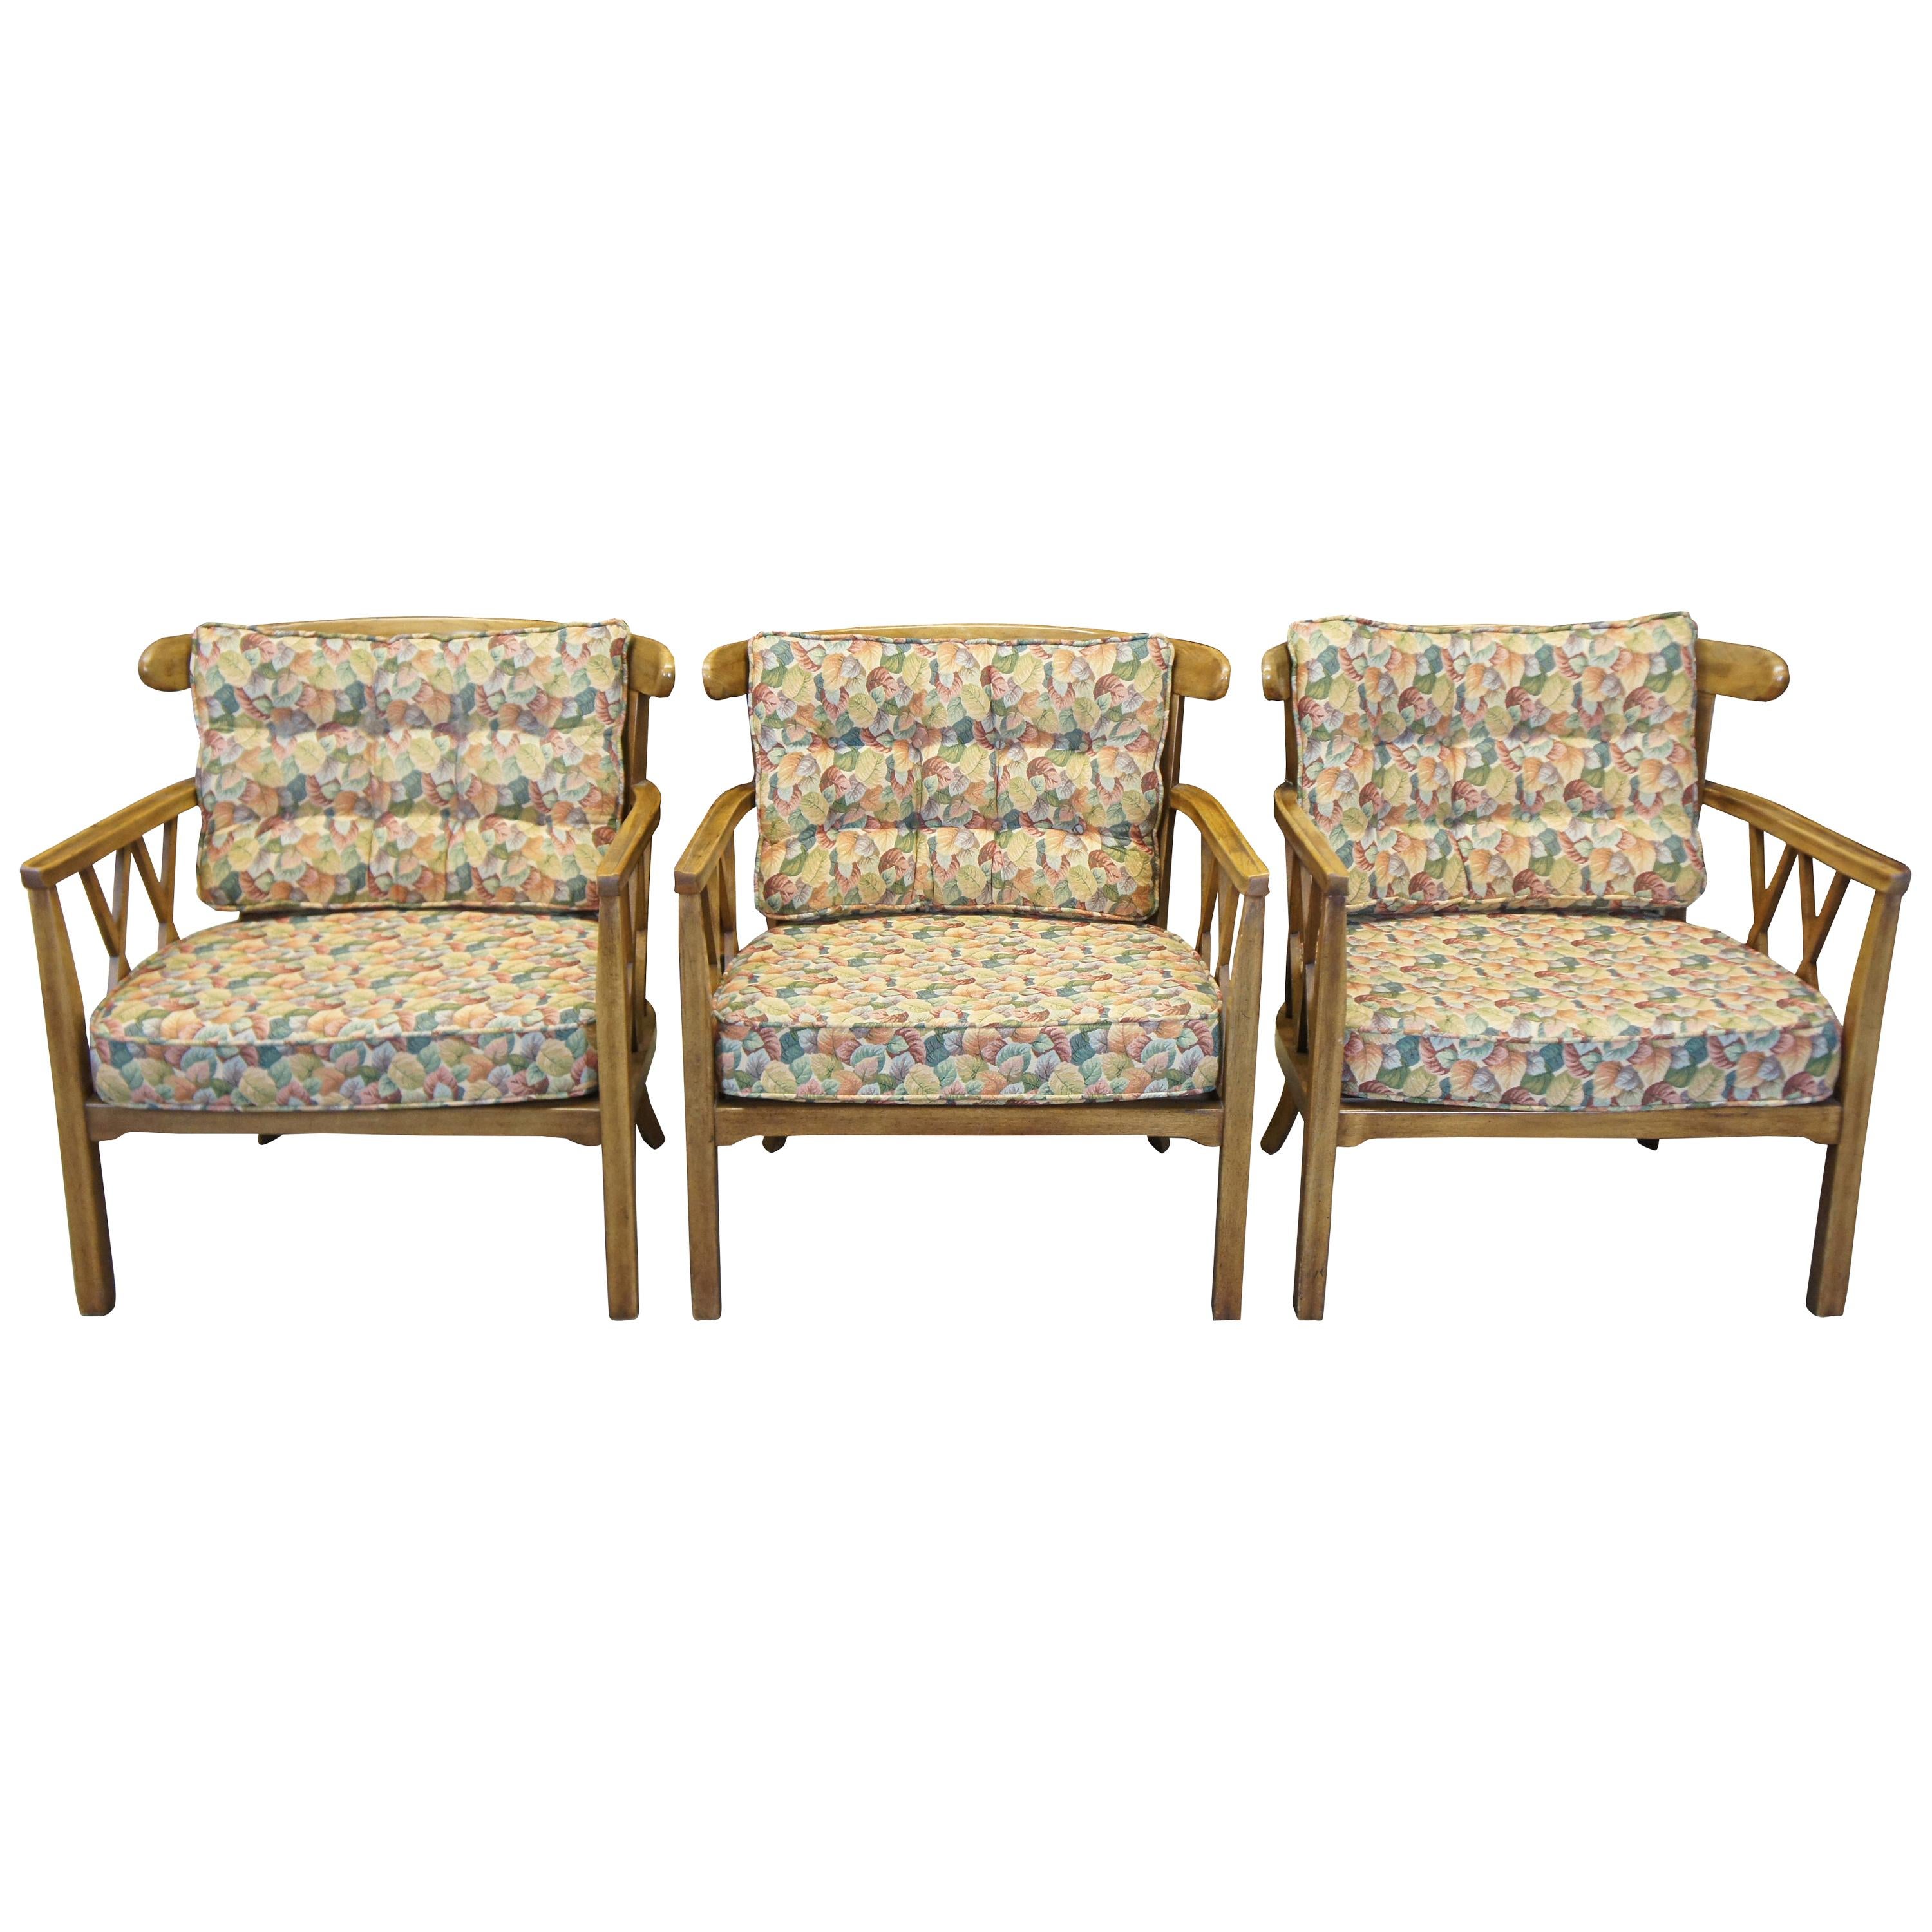 Three 1959 occasional armchairs by Finch Furniture for Thomasville Chair Company. Made from walnut with a barrel back design and unique x shaped supports. The chairs feature a floral cushion and back support.
 